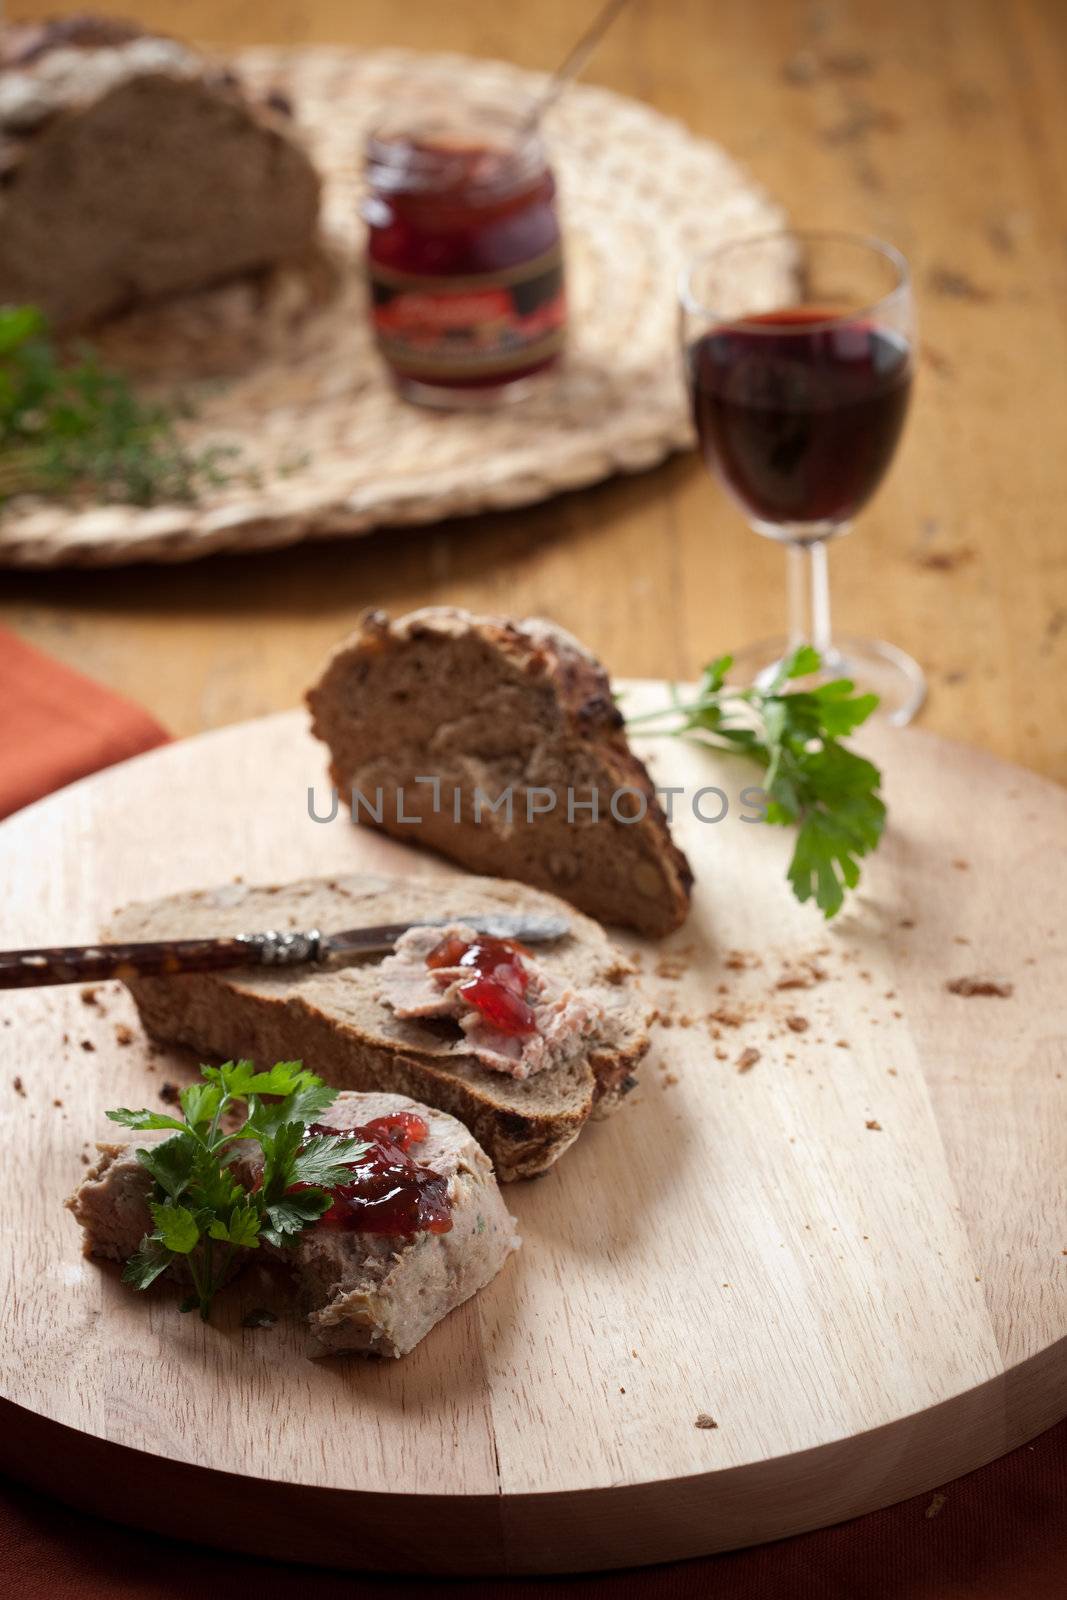 Delicious homemade pate with a glass of wine and bread